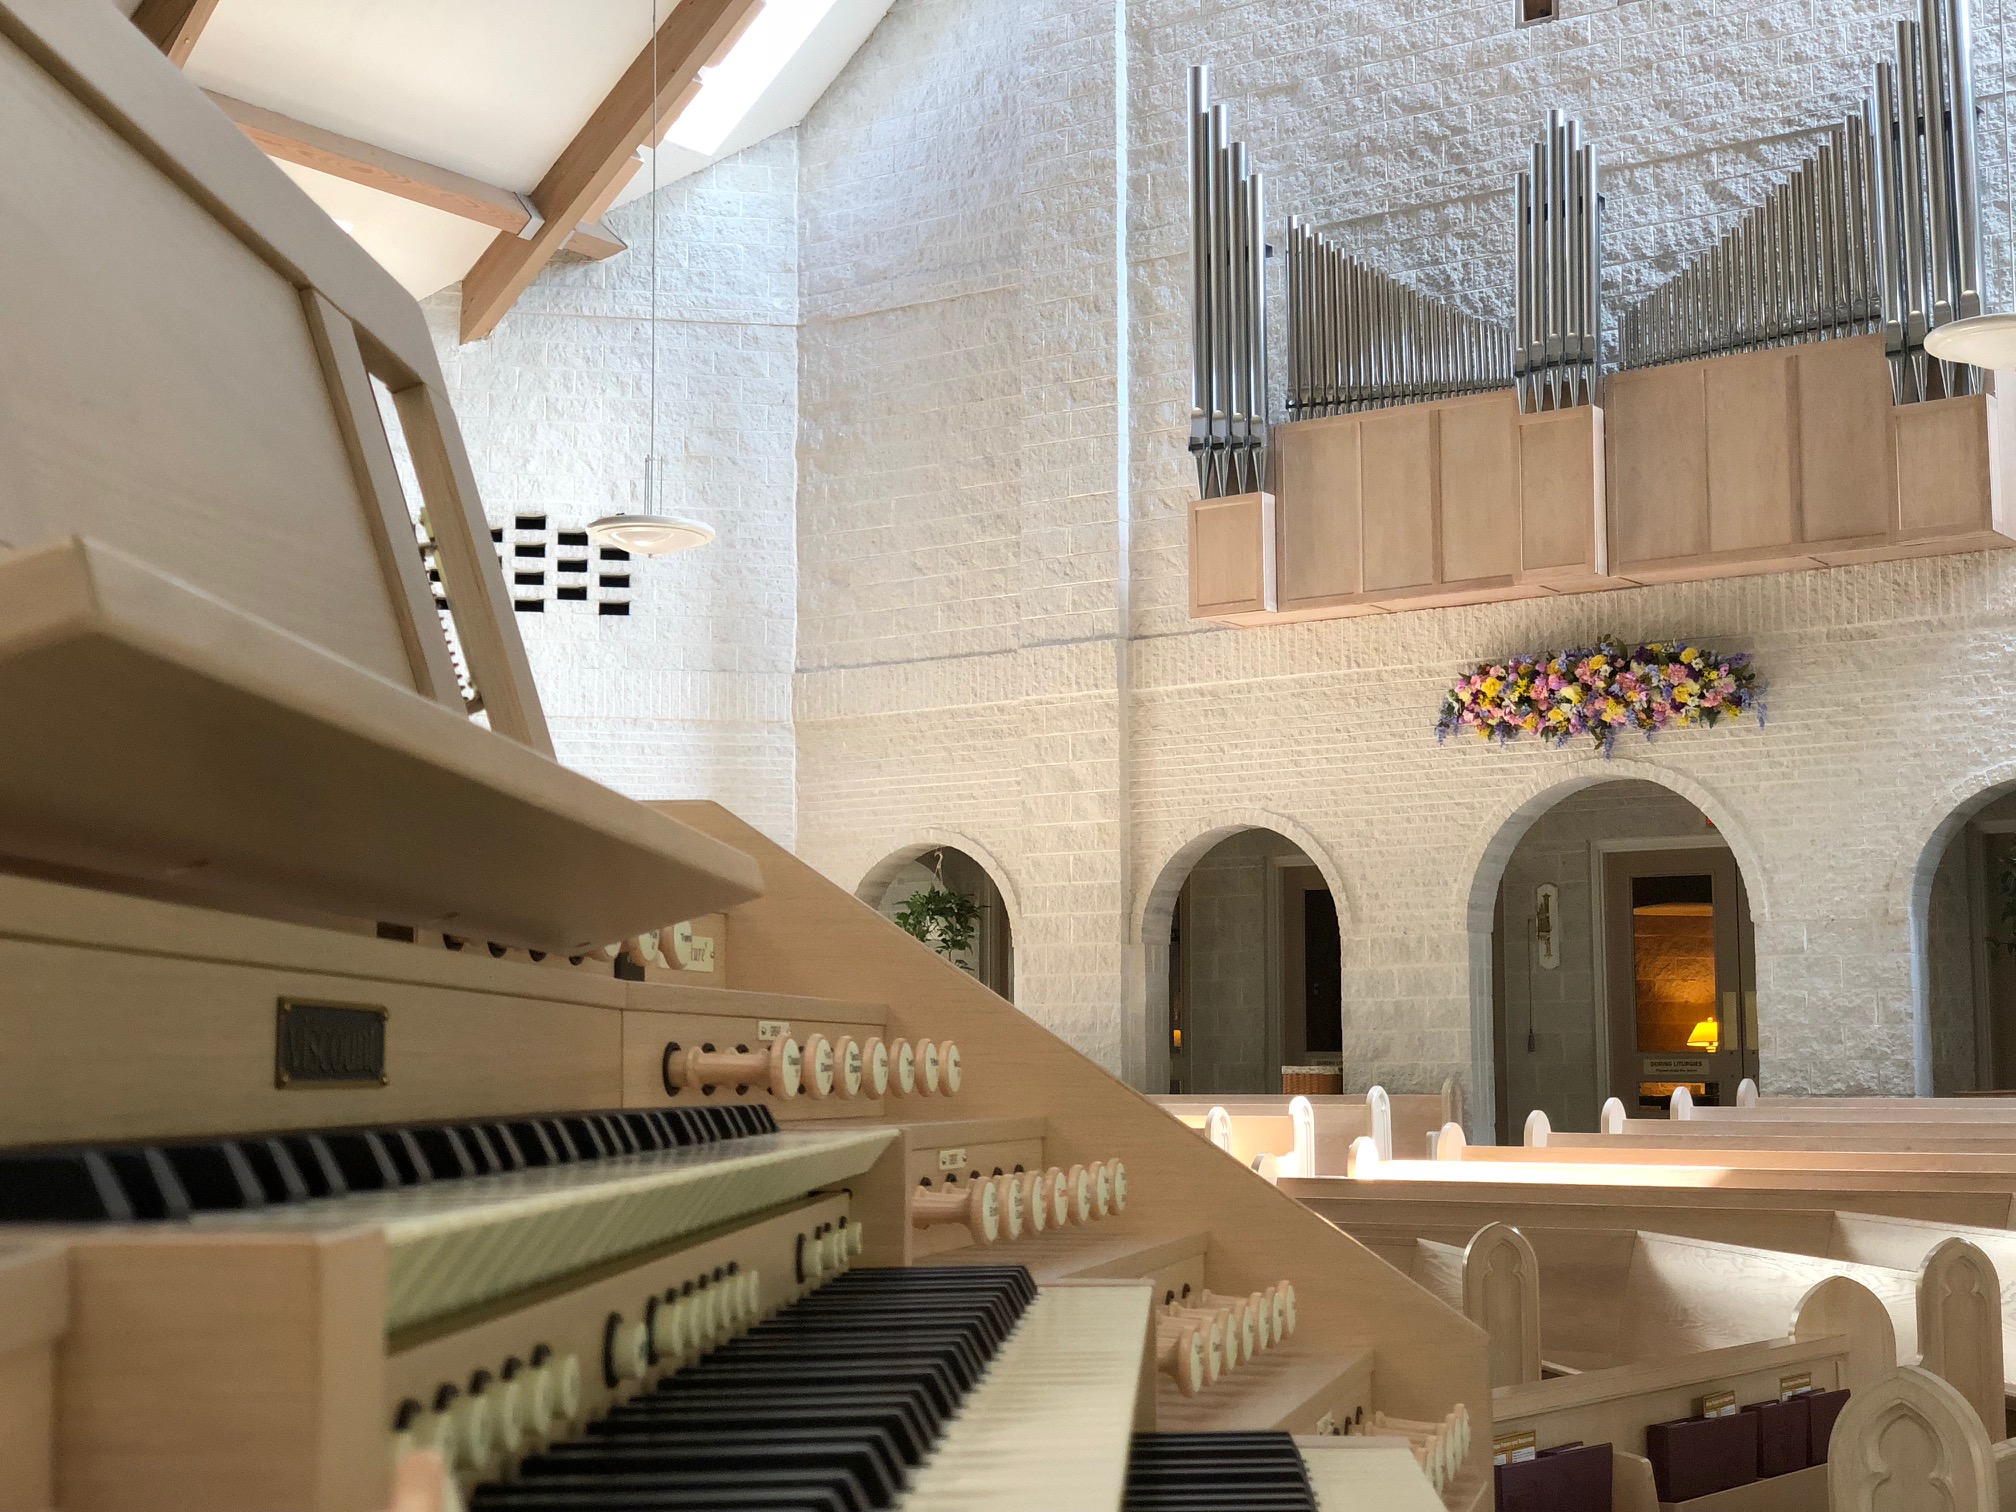 A Viscount Hybrid Pipe Organ using Physis Technology